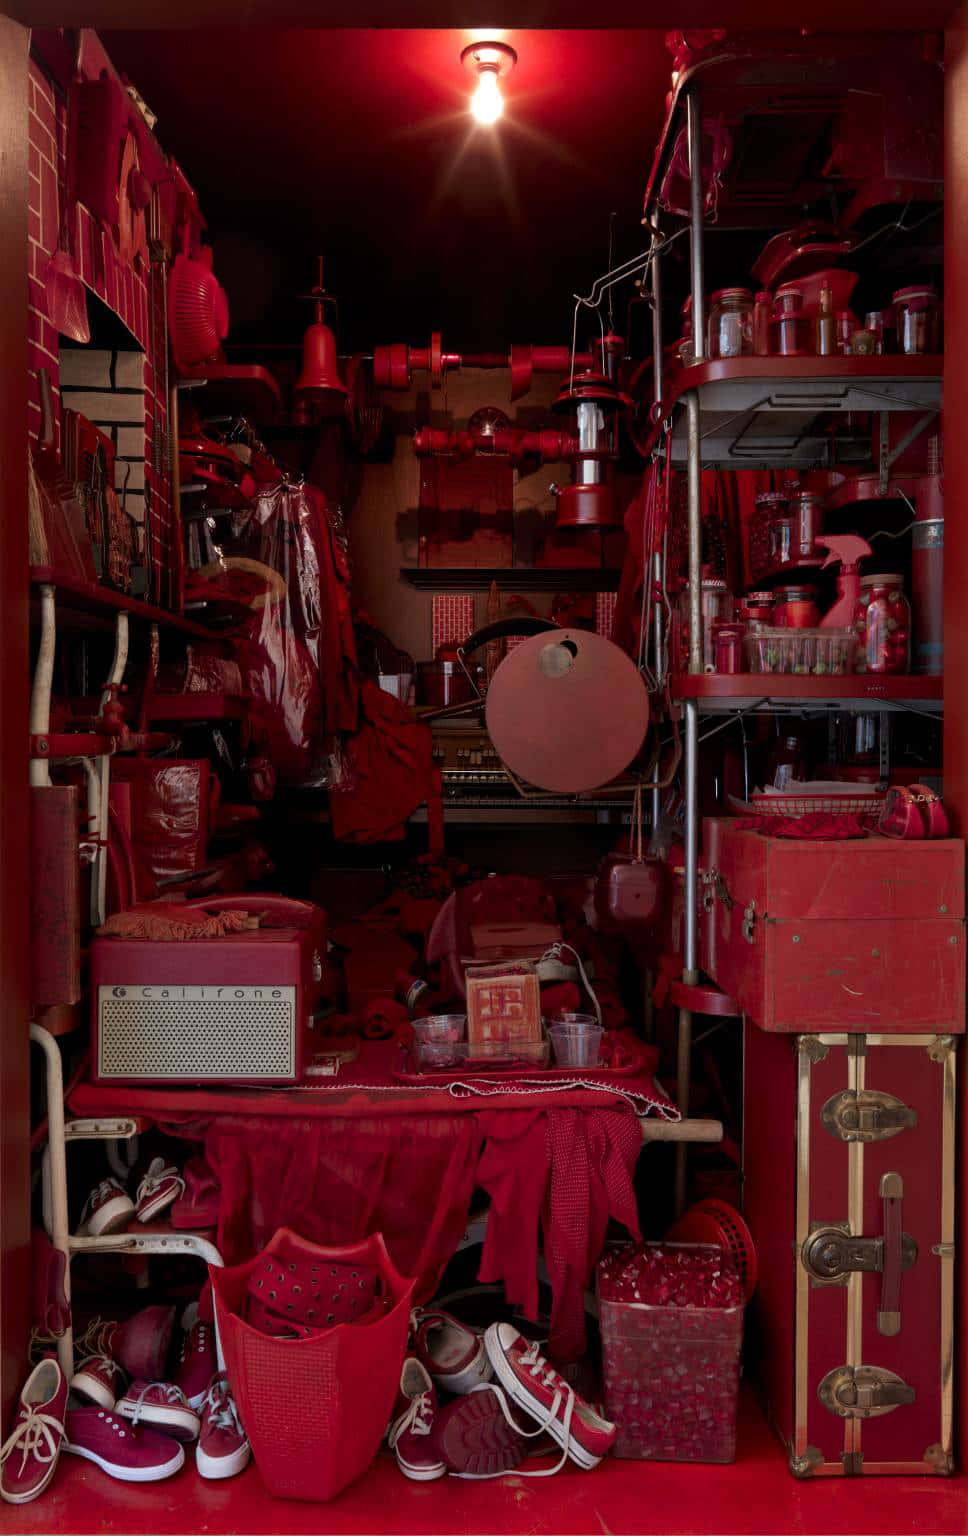 Submerge yourself In luxury in a red room